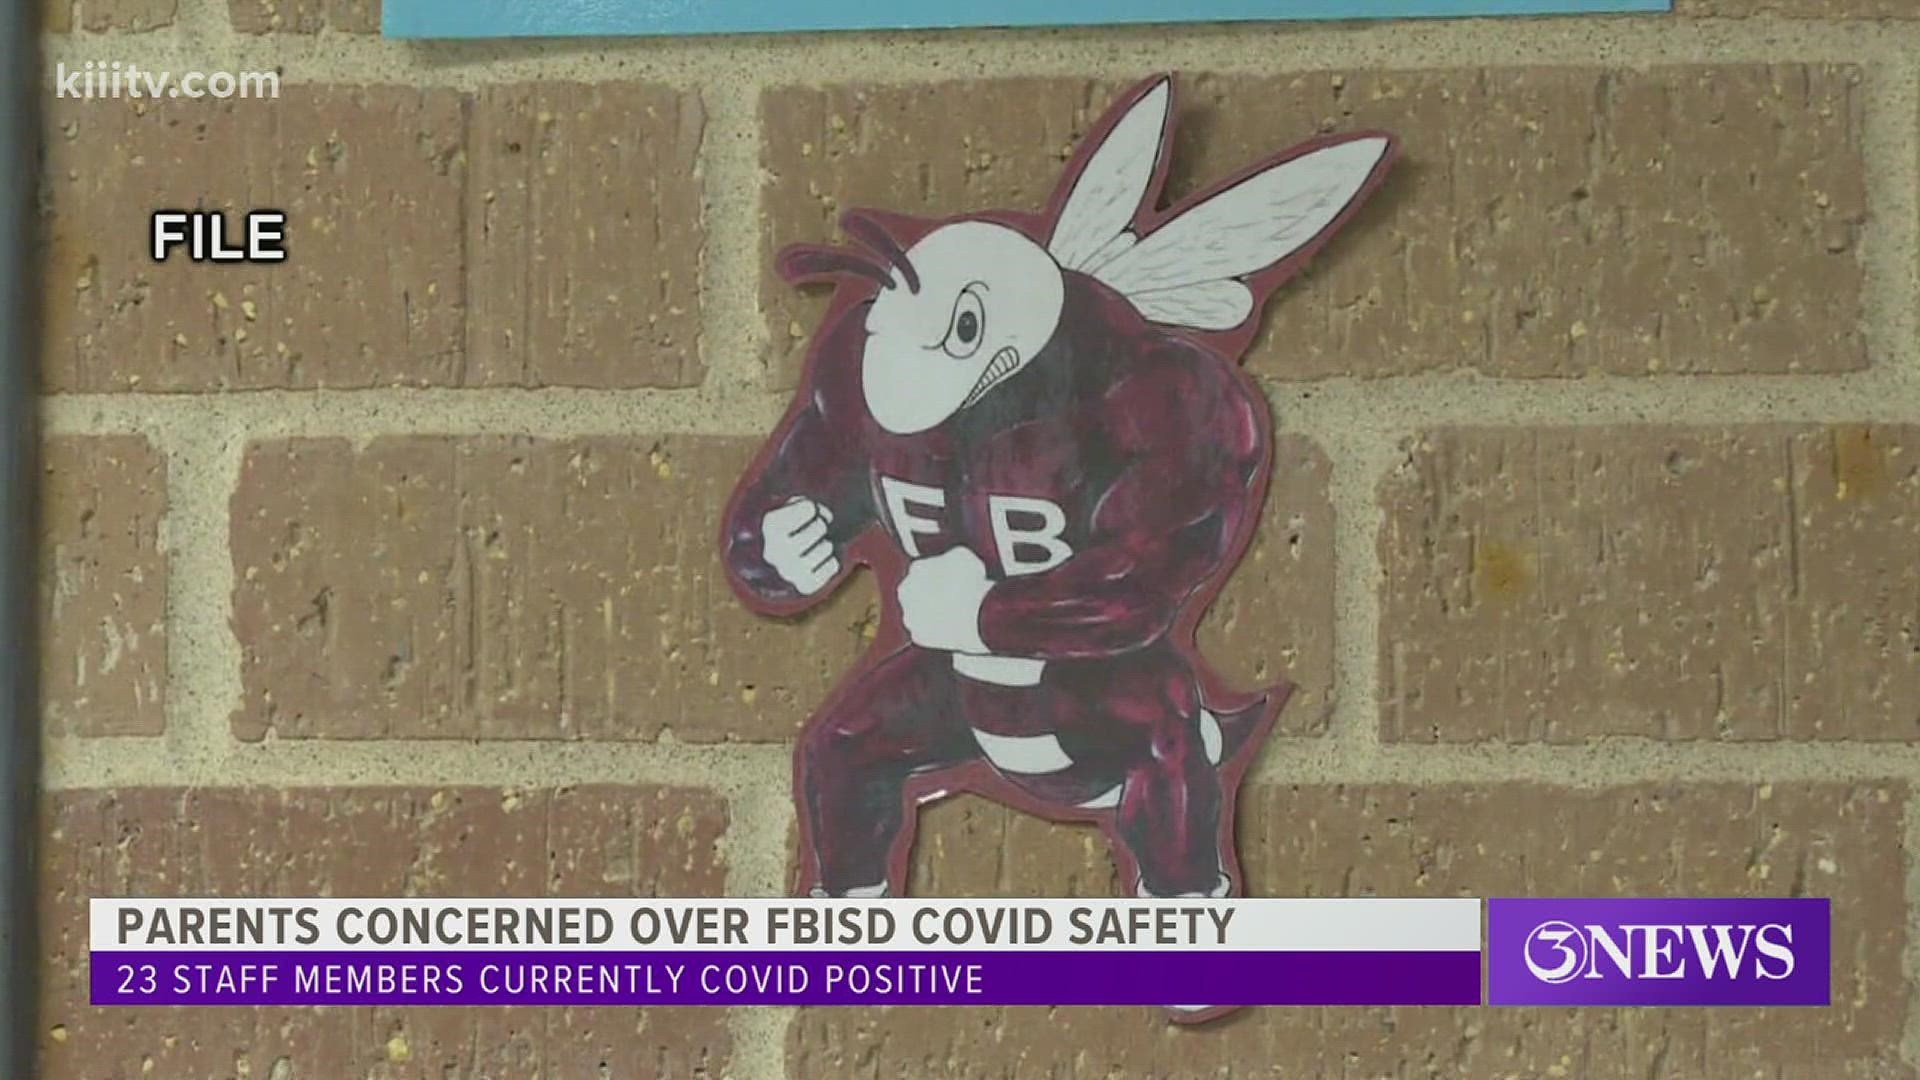 Almost 10 percent of students at the Flour Bluff Intermediate School is currently positive for COVID-19, according to the district's website.